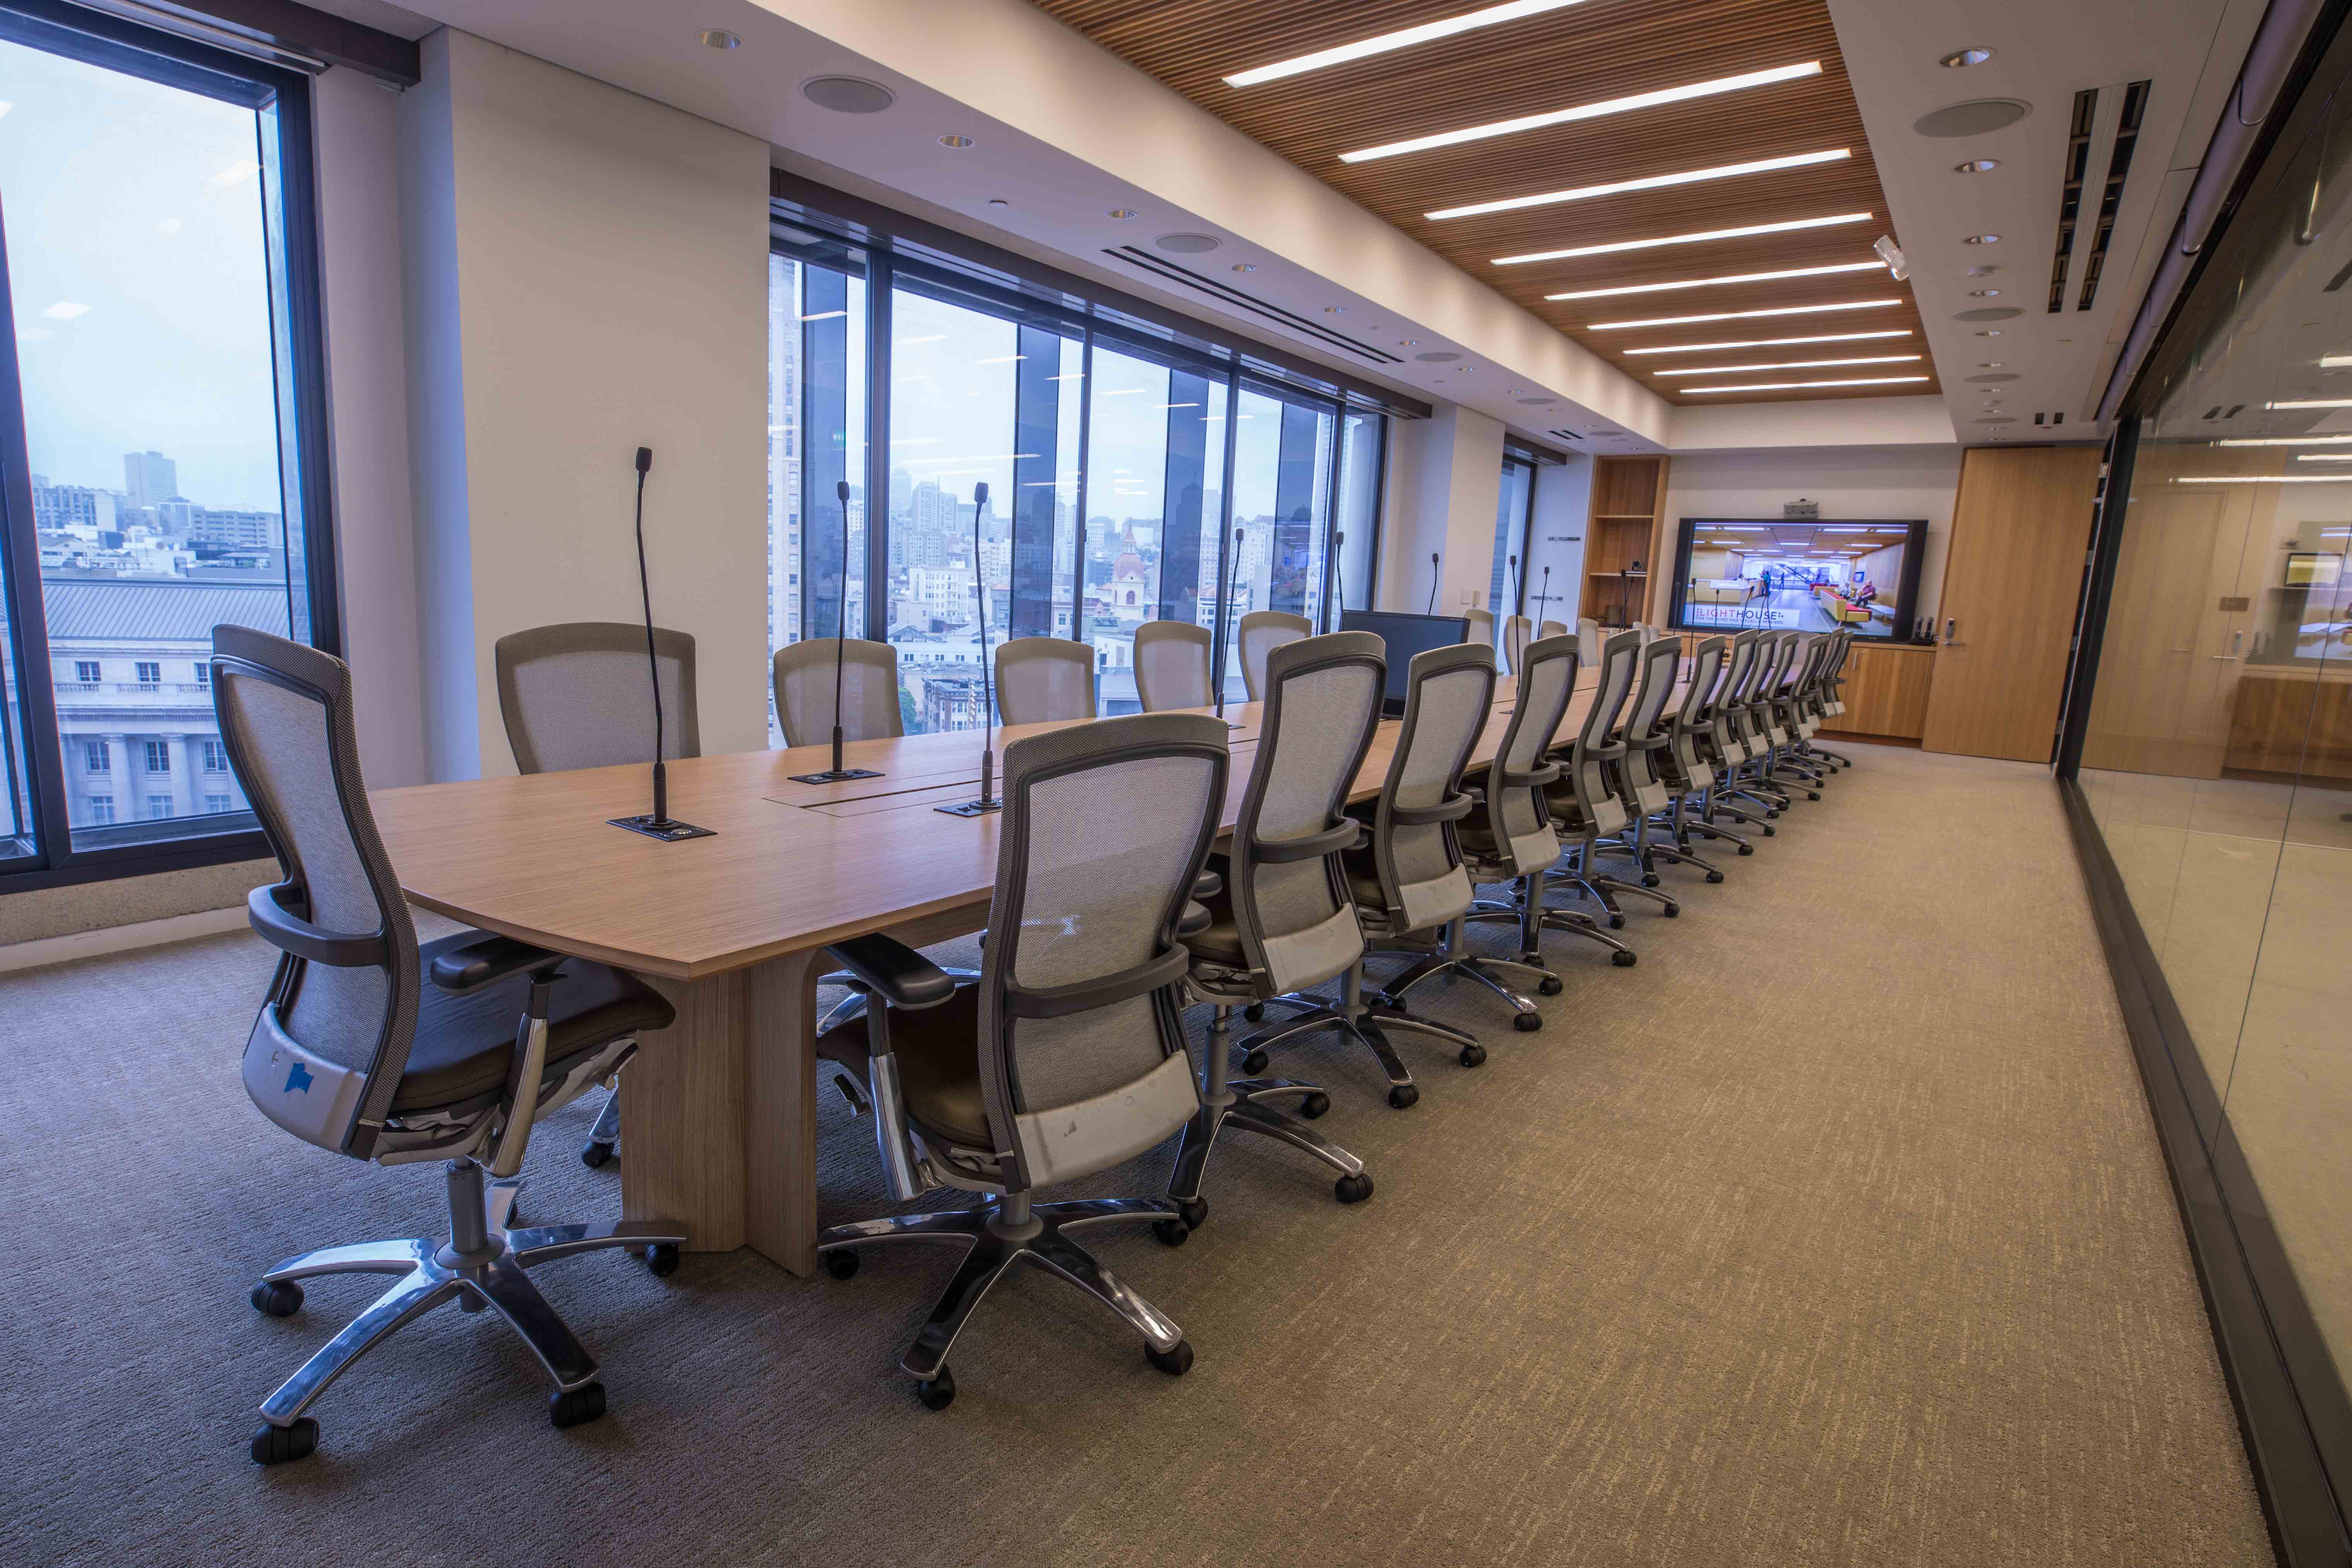 The 30-person LightHouse boardroom with a view of City Hall.